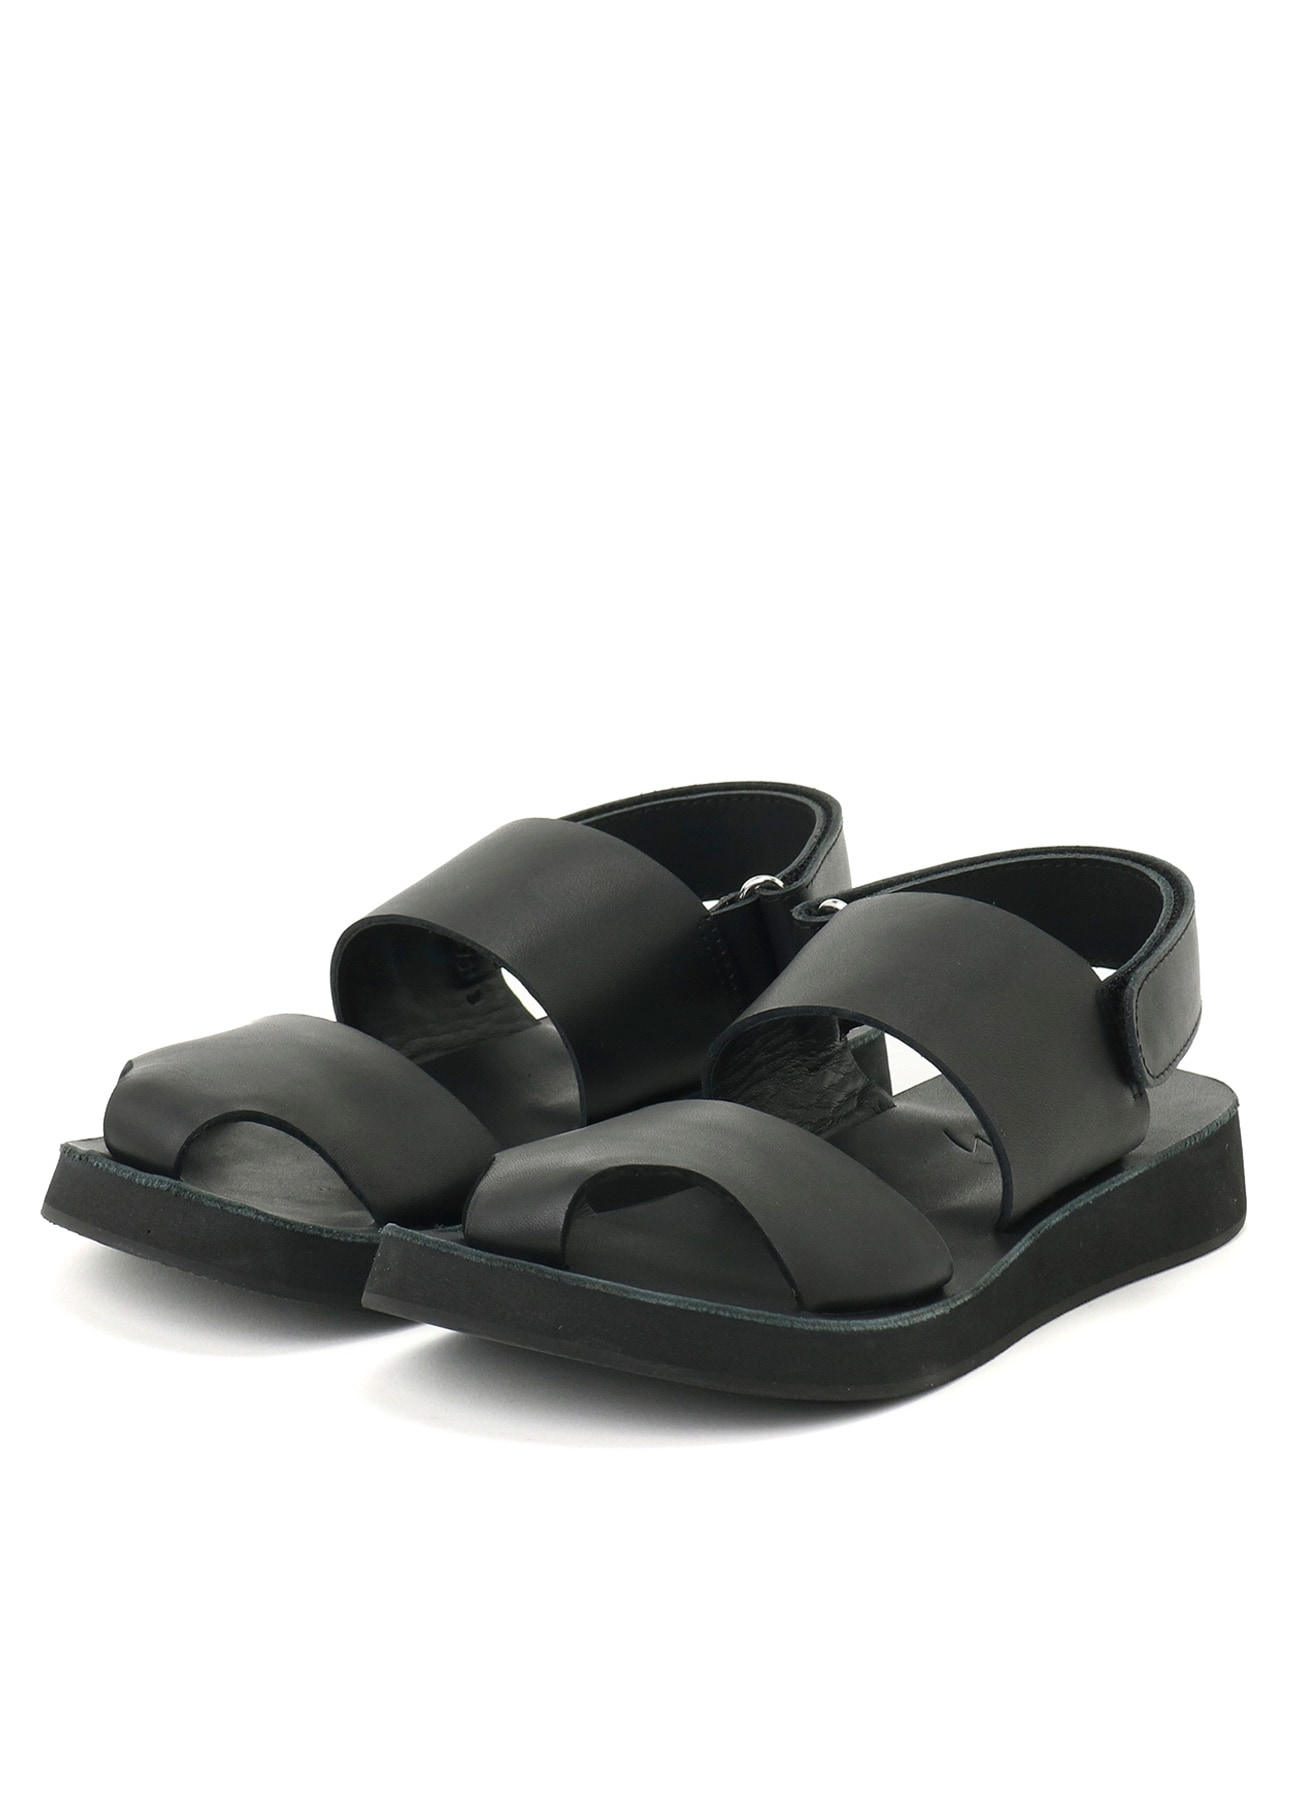 OIL SMOOTH LEATHER STRAP SANDAL